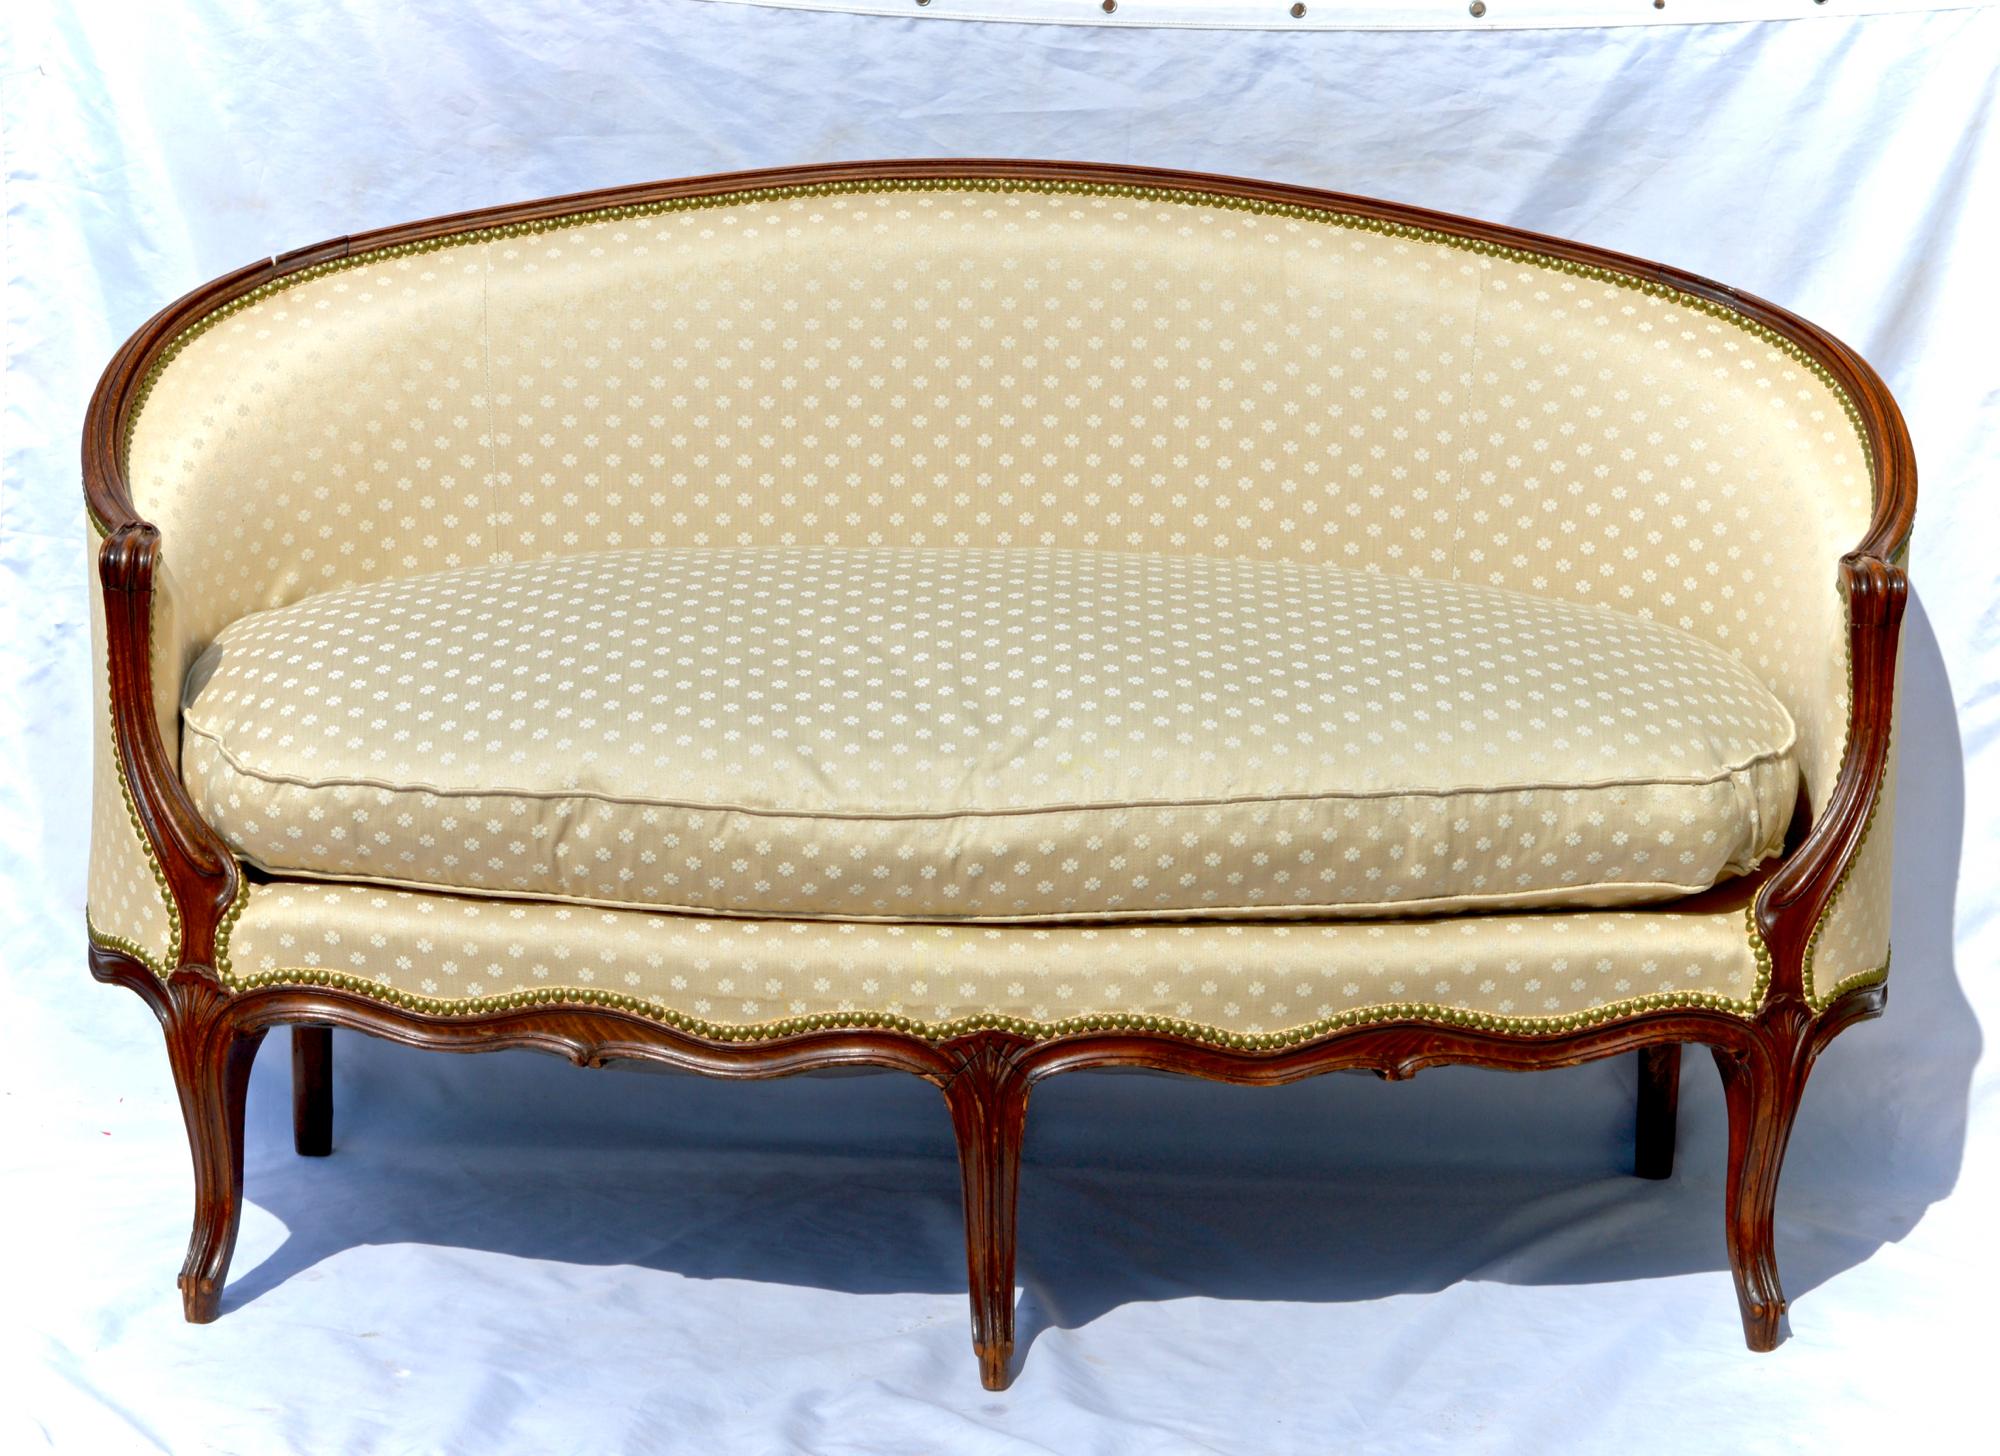 A gorgeous Louis XV style settee having well performed and carved downswept arms, a thick and cozy 100% down cushion and a lustrous patina throughout the pine and walnut frame, circa 1900, the loveseat will add warmth and antique character wherever